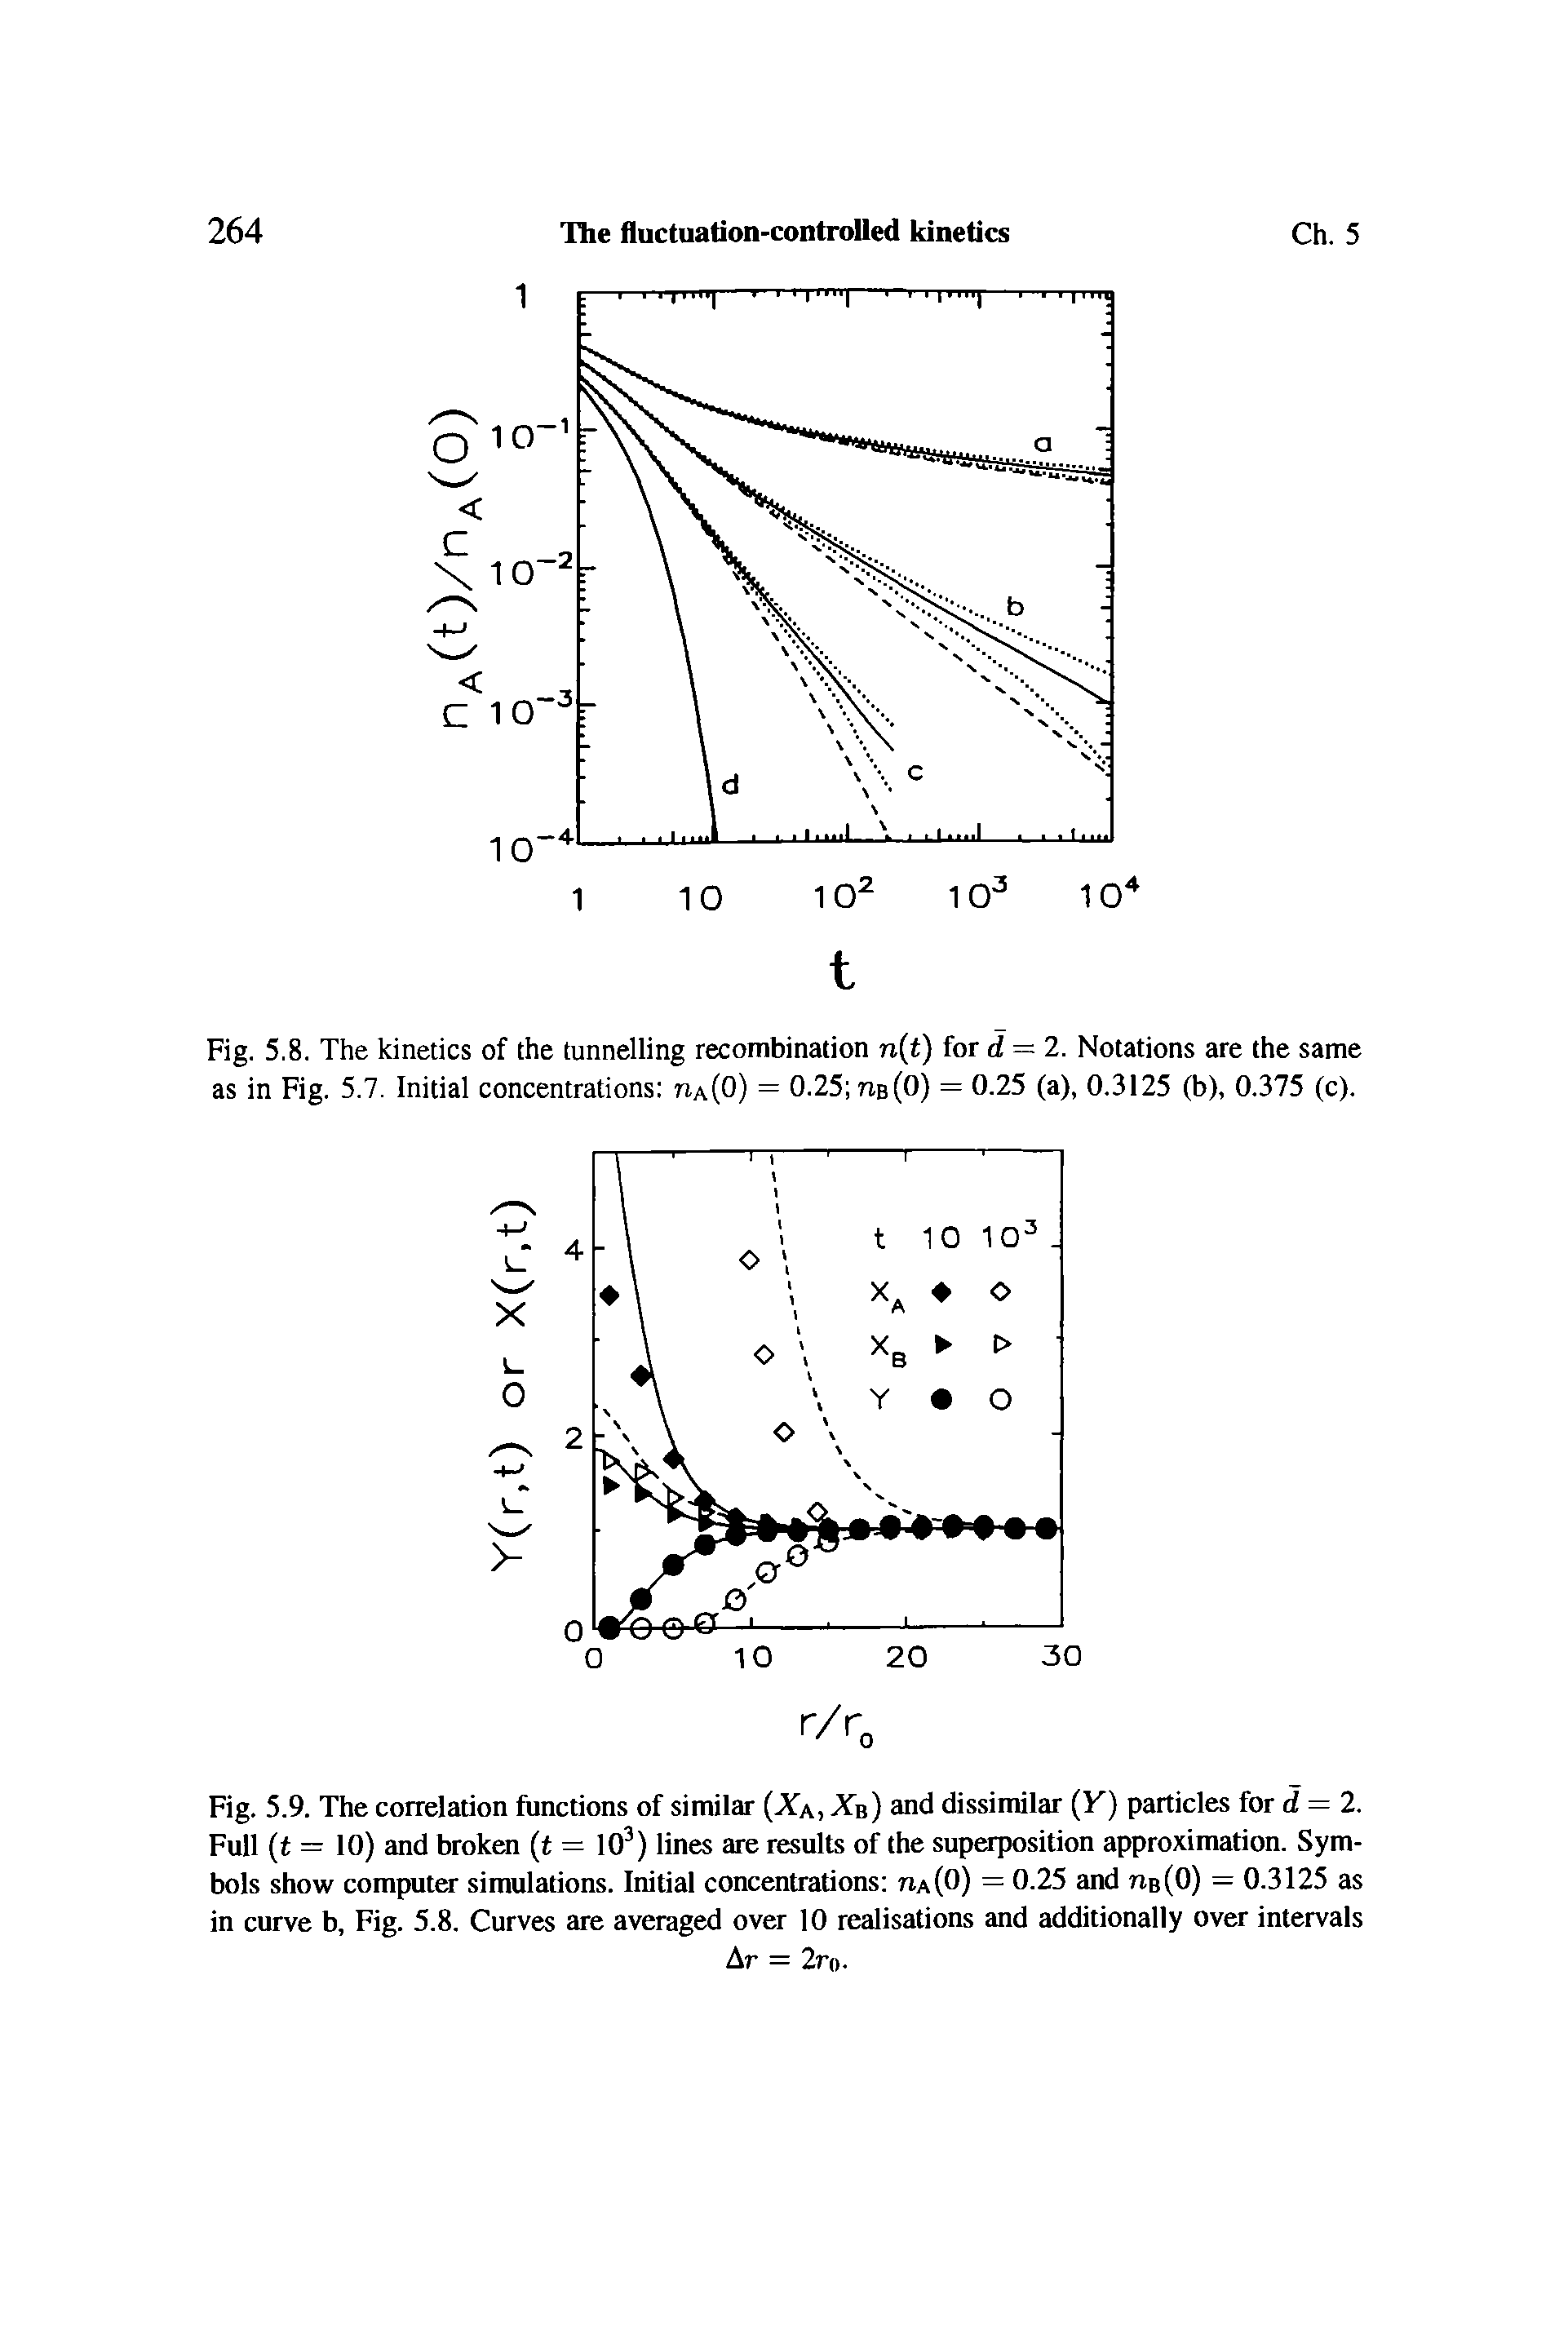 Fig. 5.9. The correlation functions of similar X, Xn) and dissimilar (F) particles for d = 2. Full (t = 10) and broken (t = 103) lines are results of the superposition approximation. Symbols show computer simulations. Initial concentrations tia(0) = 0.25 and ne(0) = 0.3125 as in curve b, Fig. 5.8. Curves are averaged over 10 realisations and additionally over intervals...